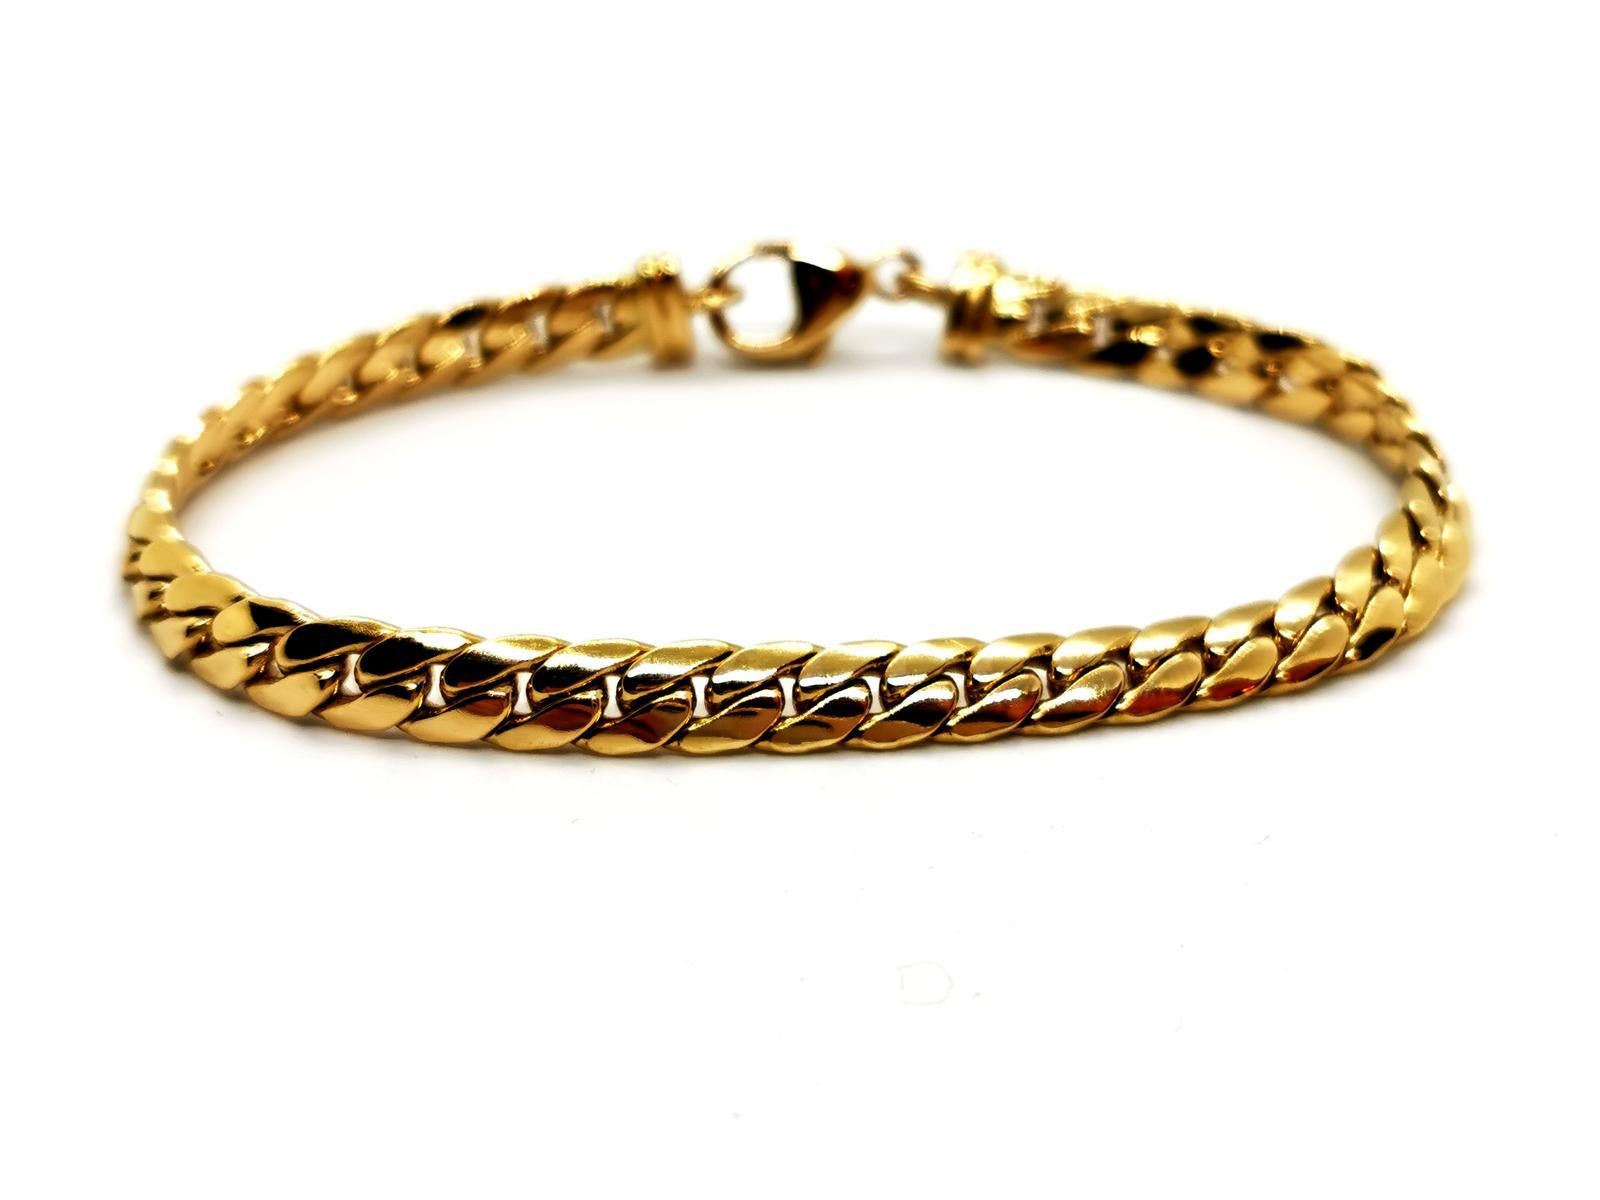 Bracelet Yellow Gold 750 thousandths massive English mesh. length: 18 cm. width: 0.53 cm. thickness: 0.19 cm. total weight: 18.20 g. eagle punch head. excellent condition
